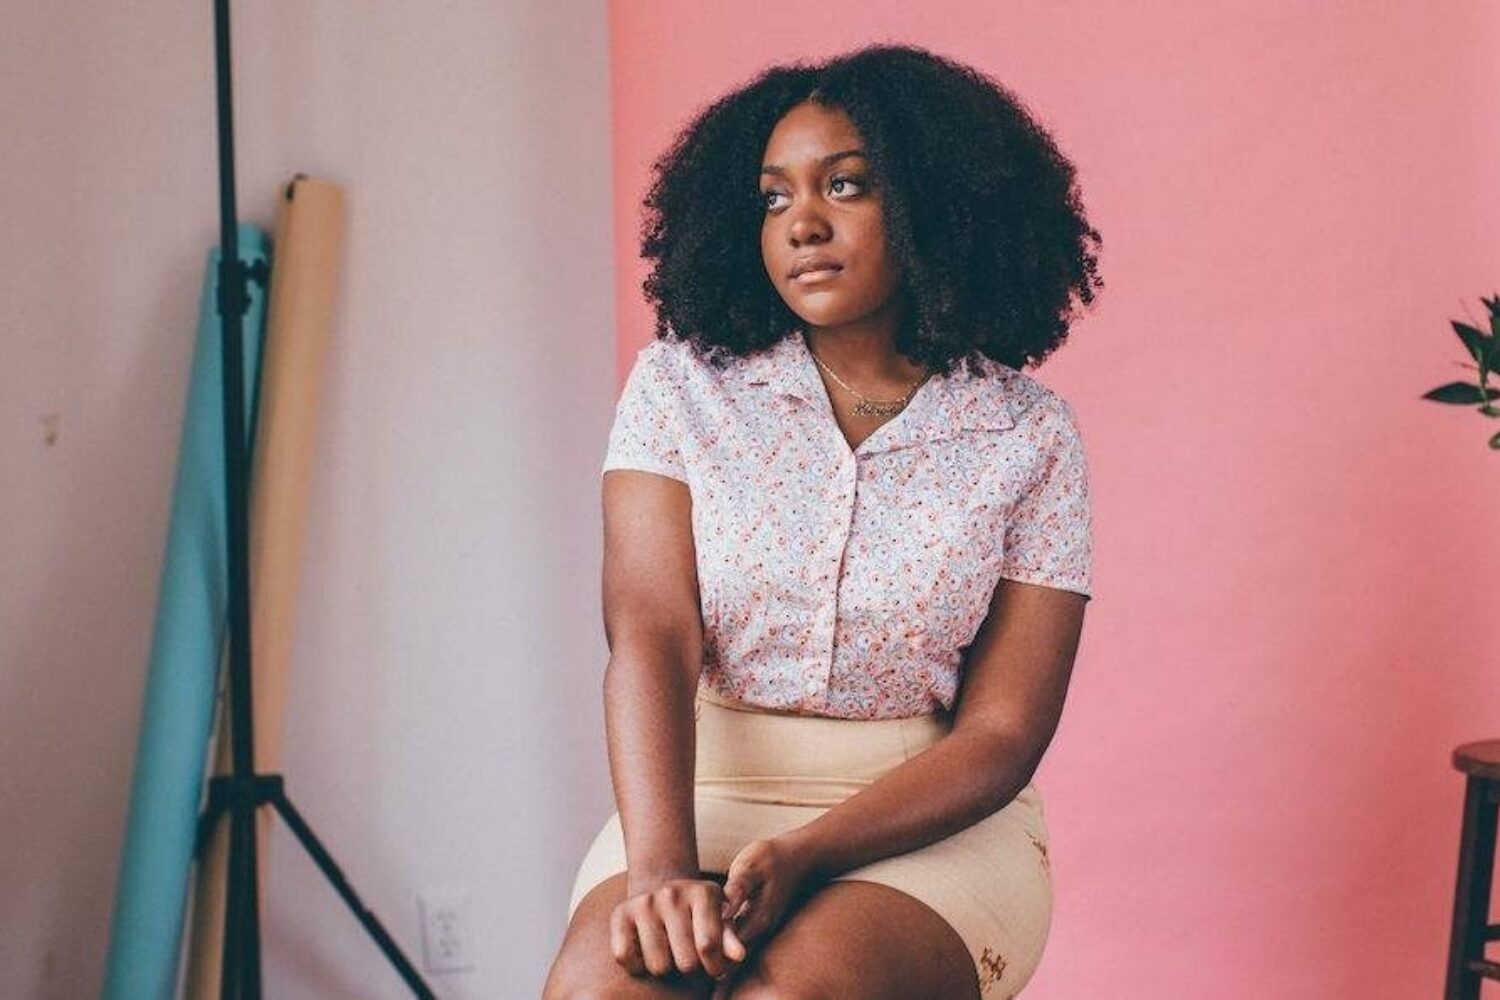 Noname's new album 'Room 25' is out next month! DIY